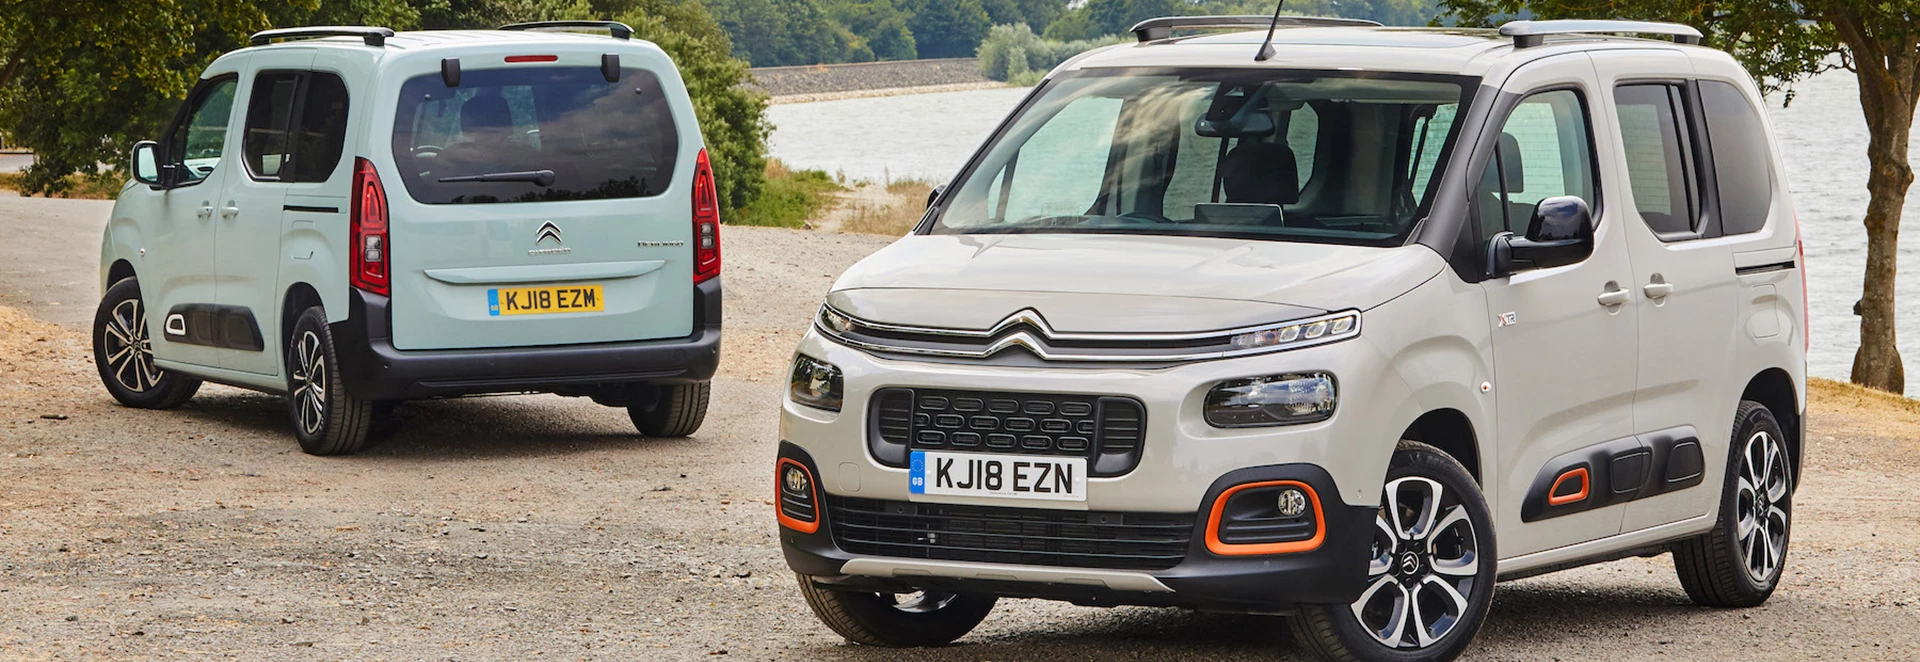 5 things you didn’t know about the Citroen Berlingo